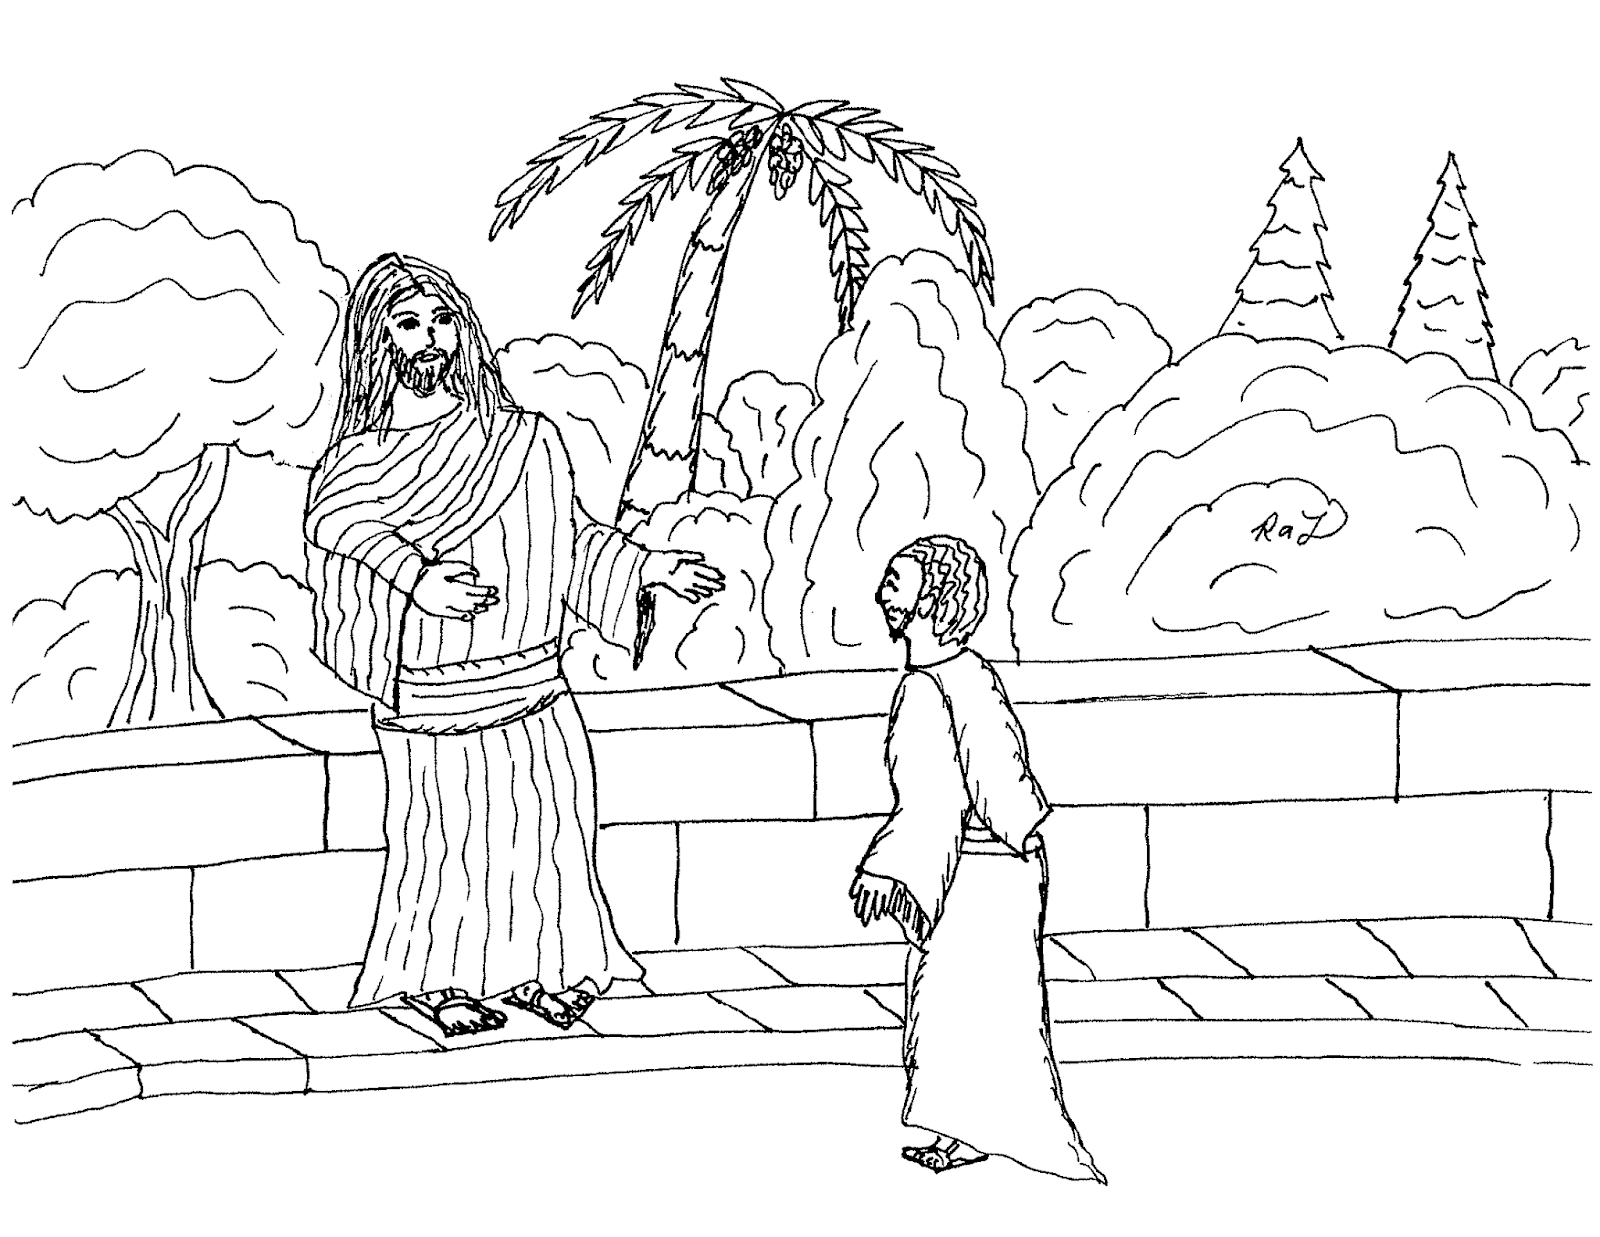 Download Robin's Great Coloring Pages: Jesus ministering to Individuals